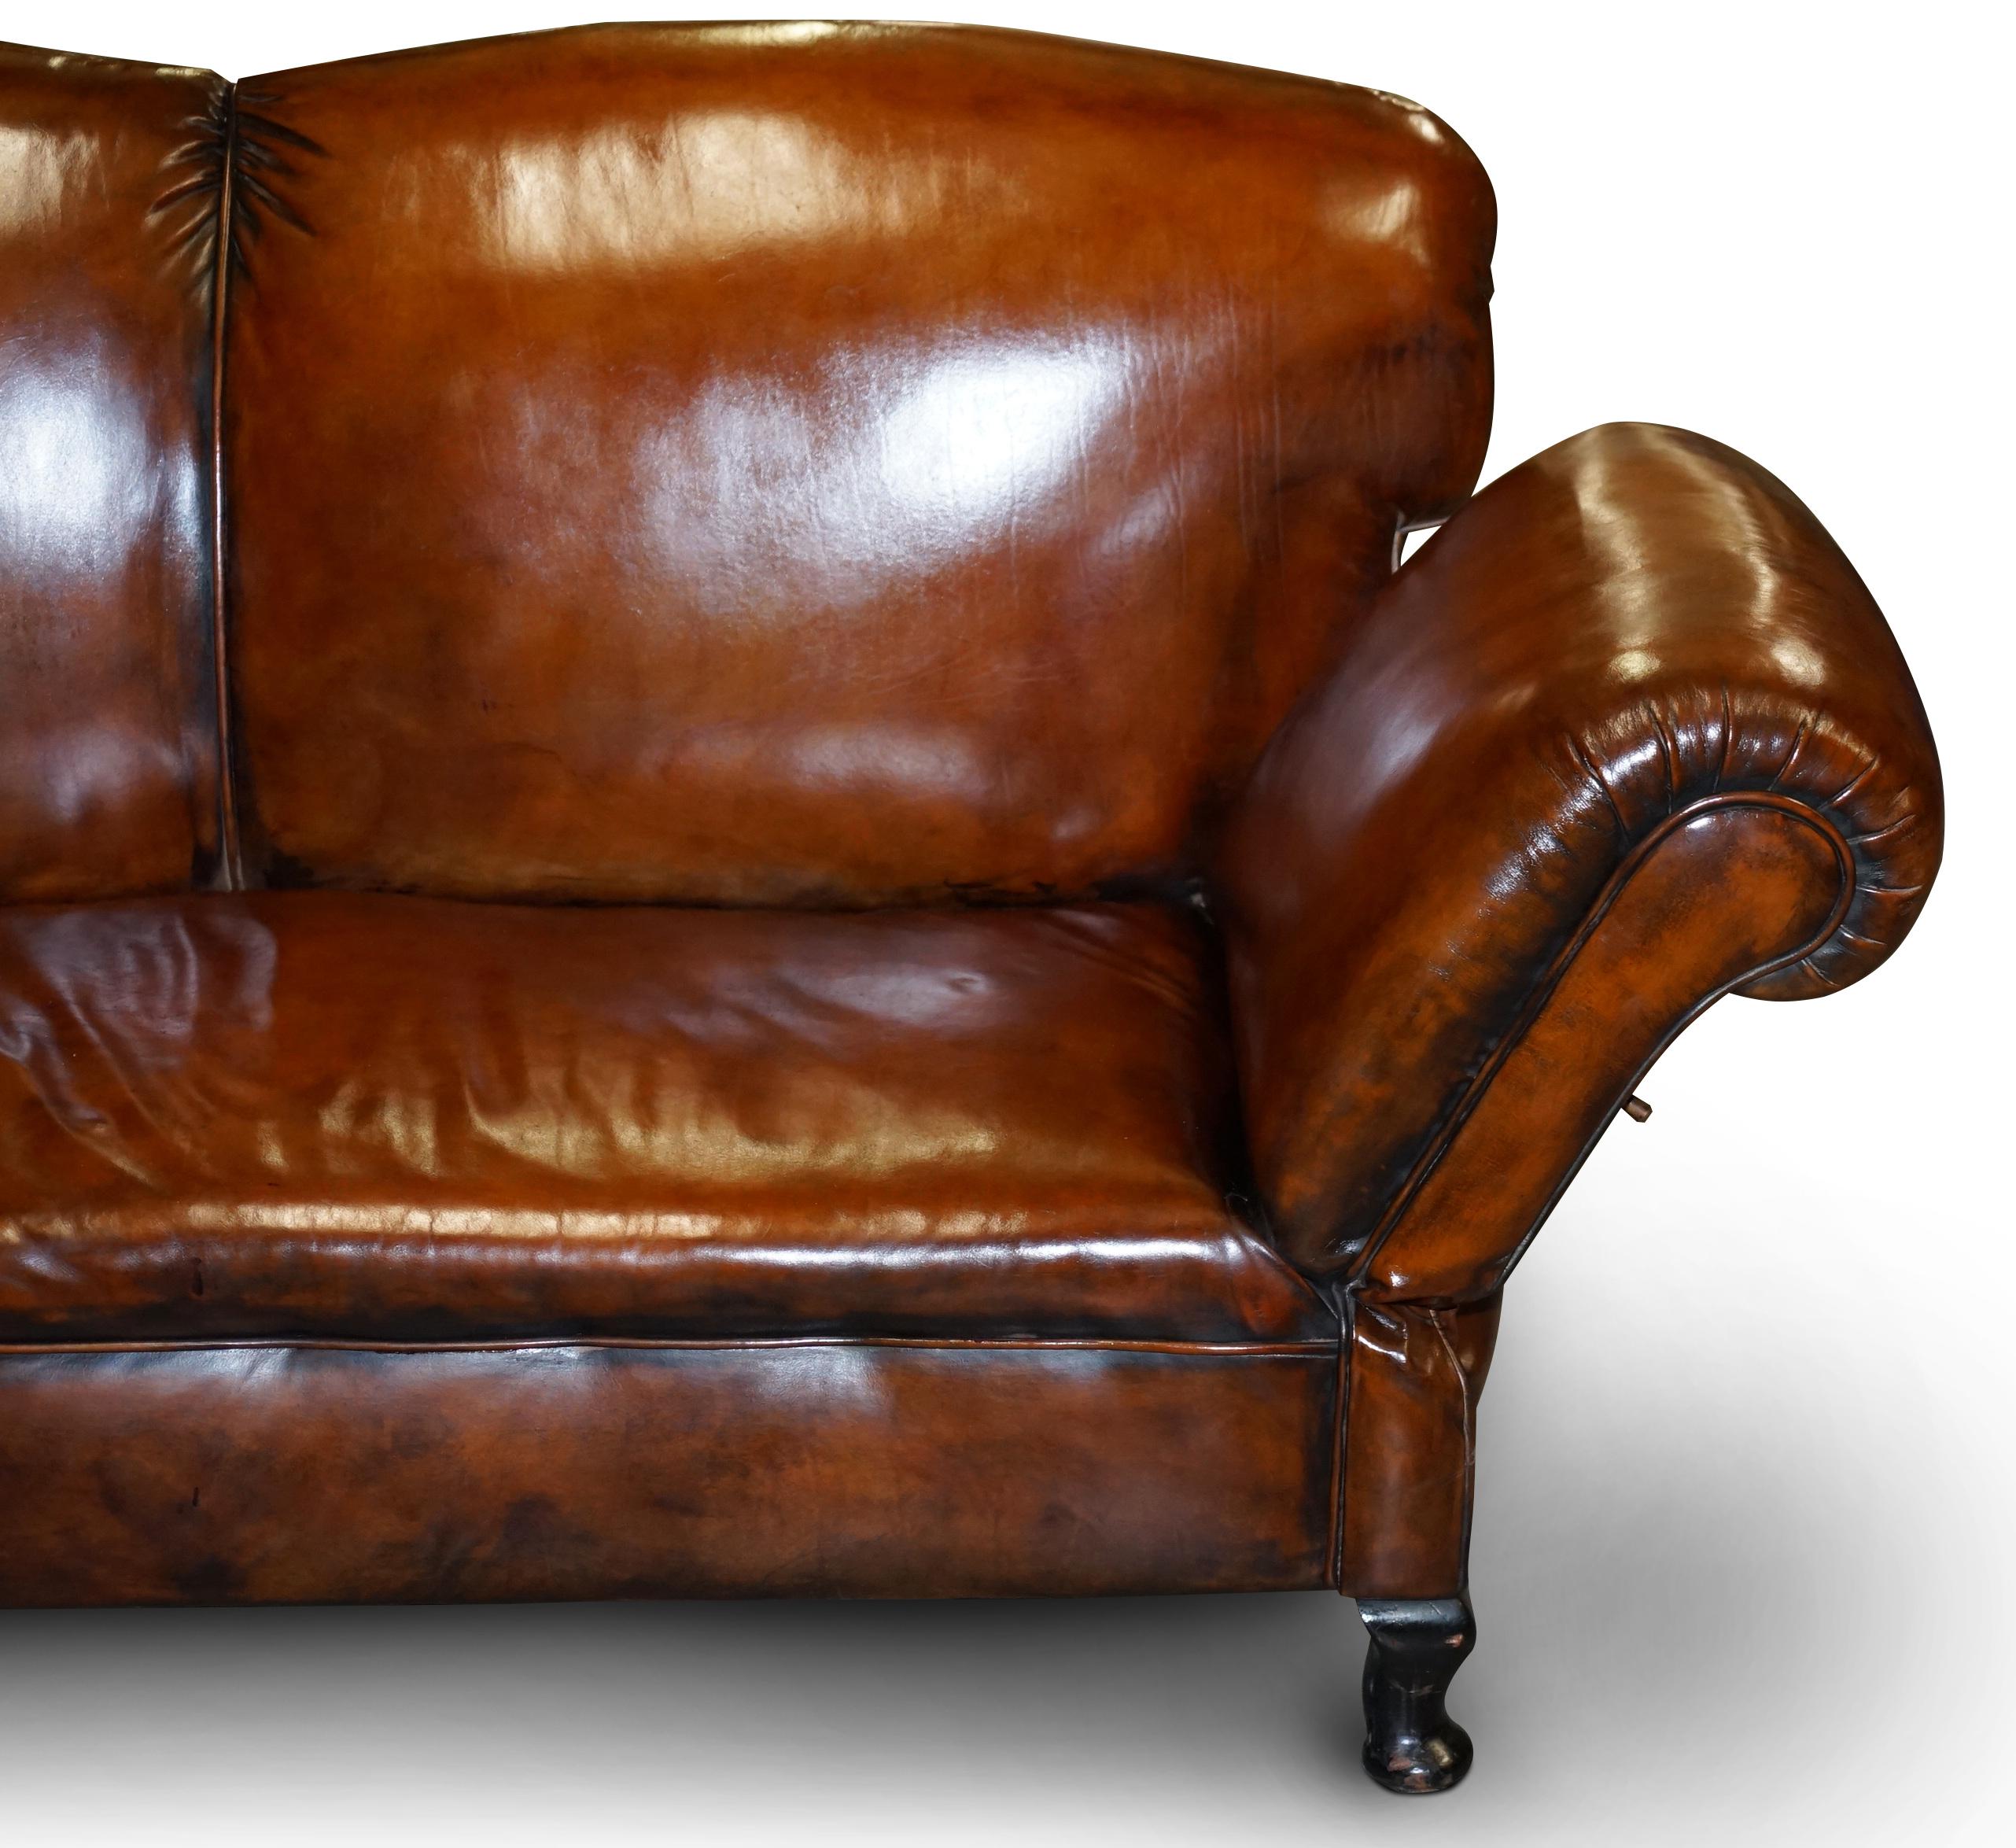 Fully Restored Whisky Brown Leather Drop Arm Chaise Lounge Sofa Horse Hair Fill For Sale 10